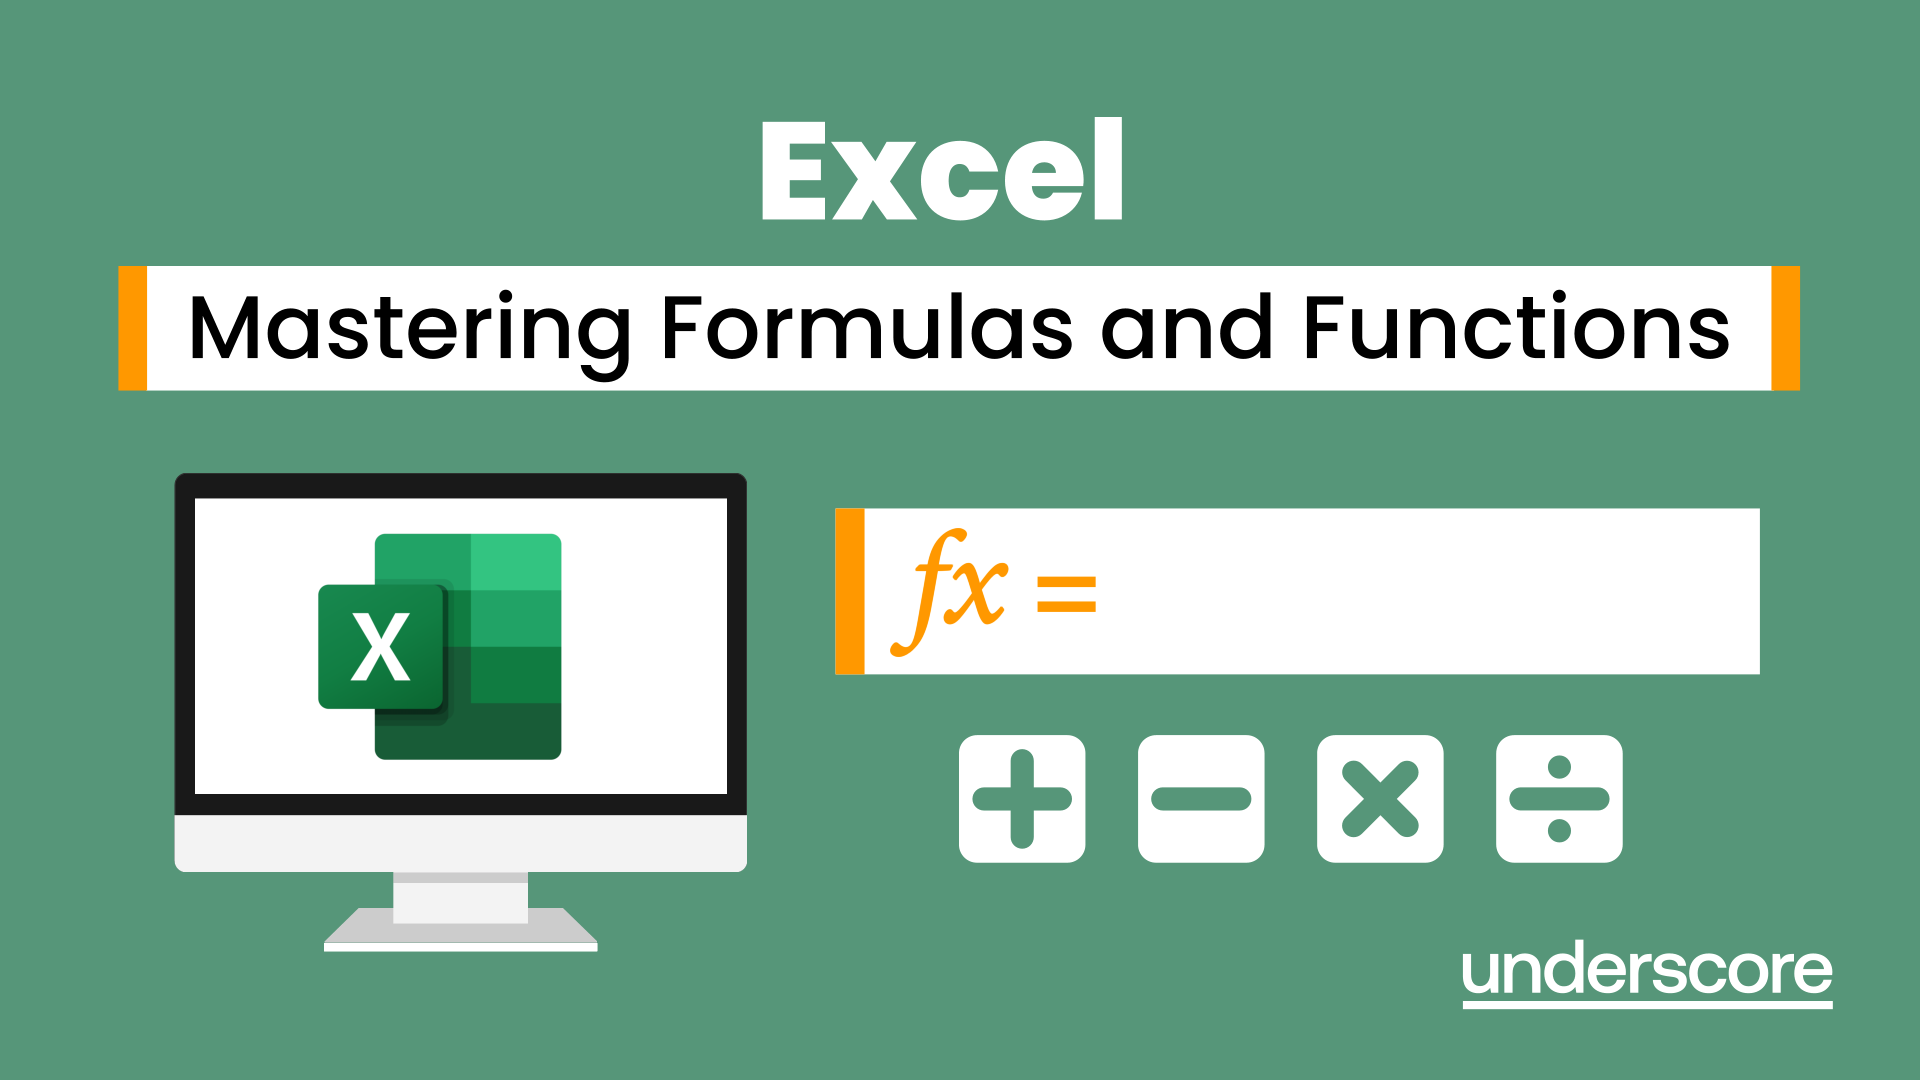 Excel - Mastering Formulas and Functions